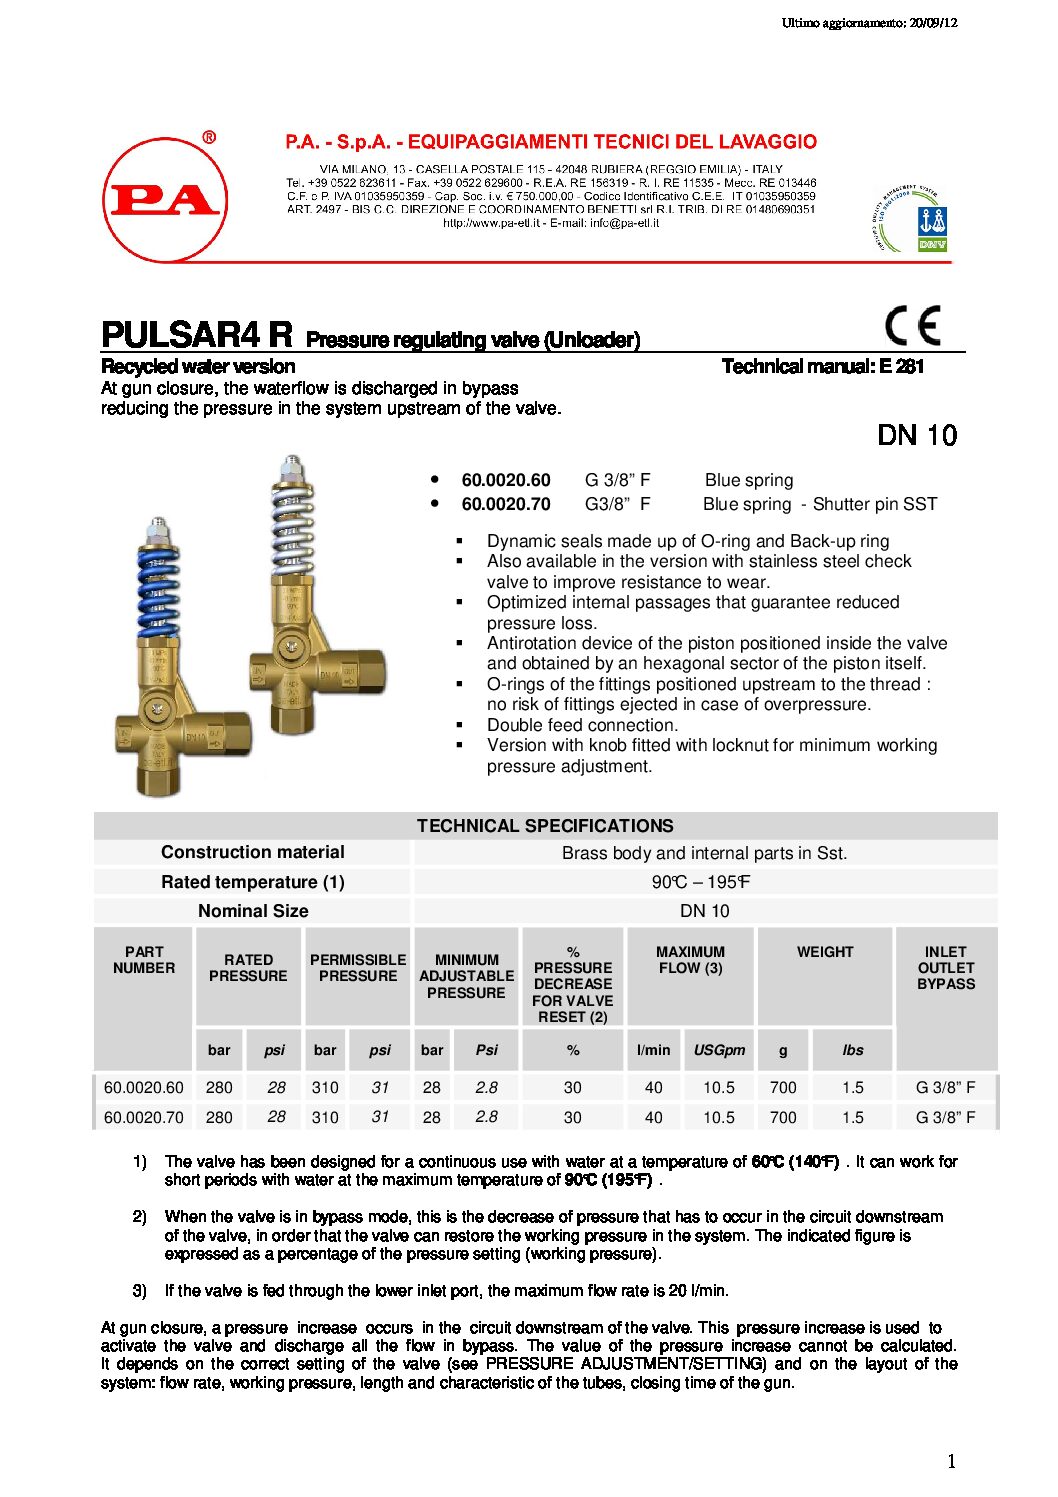 PA Pulsar 4 R Unloader valve with handle technical manual